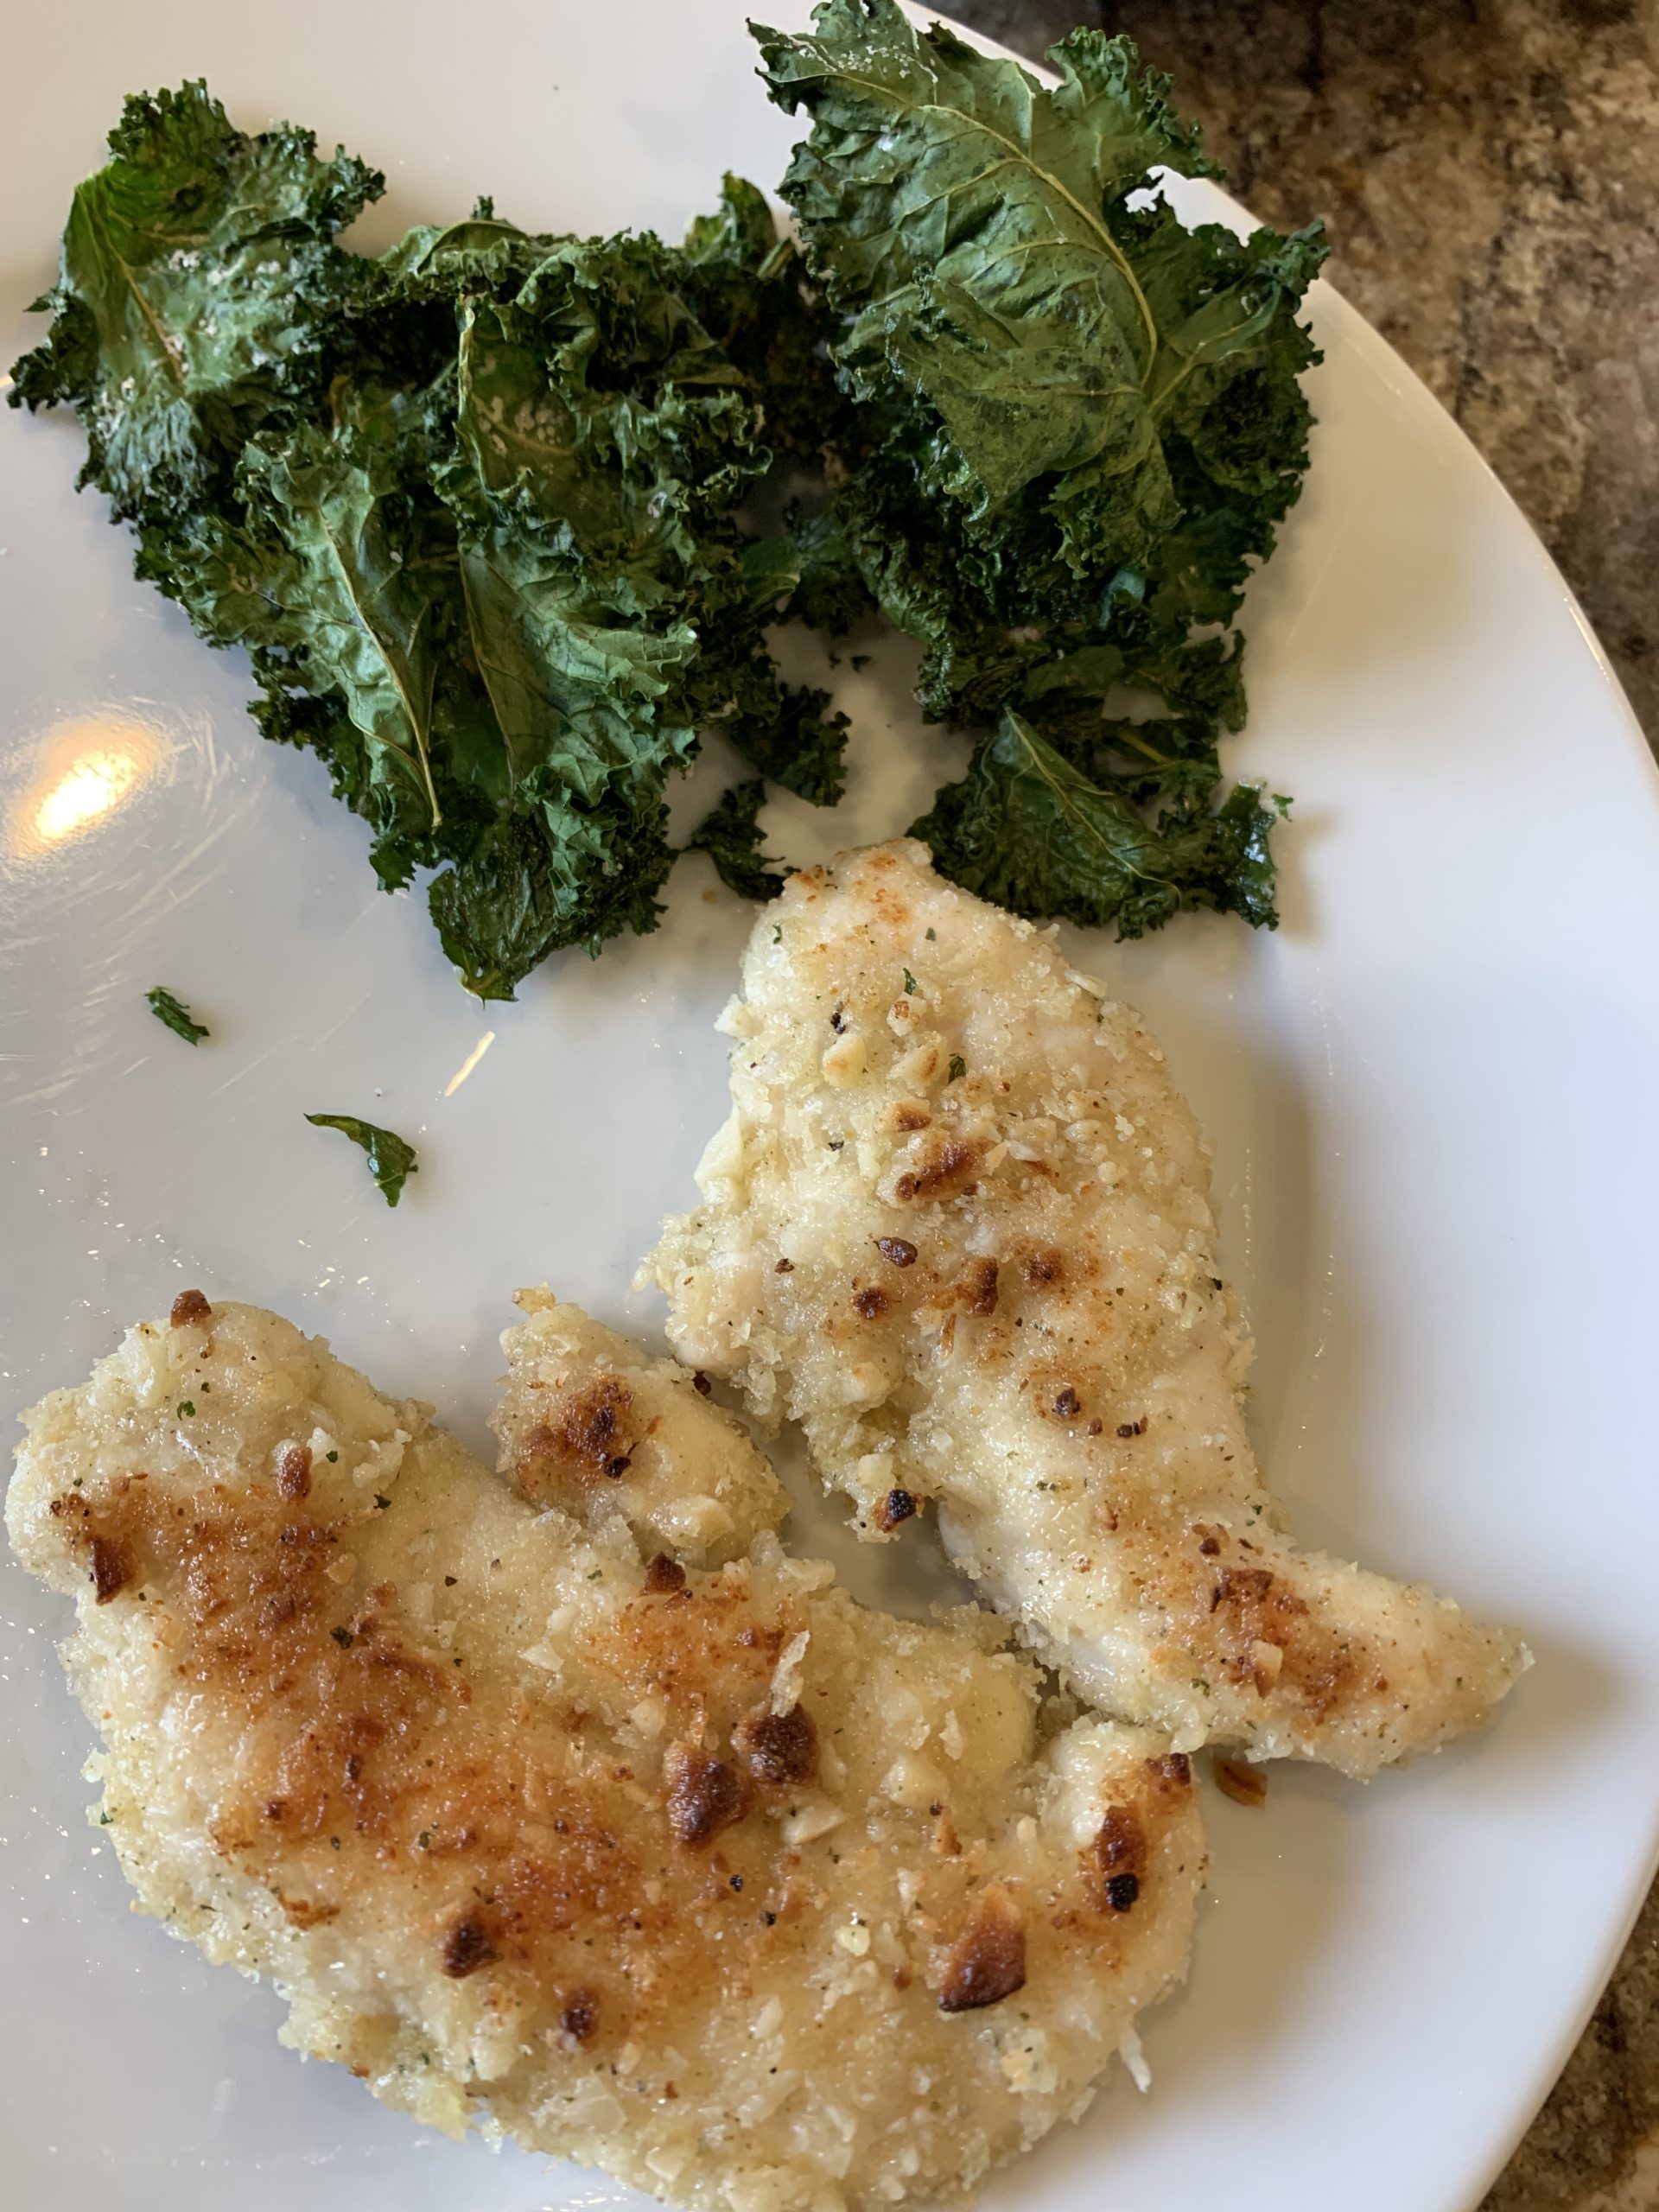 Day 9. Macadamia Nut Crusted Chicken with Kale Chips